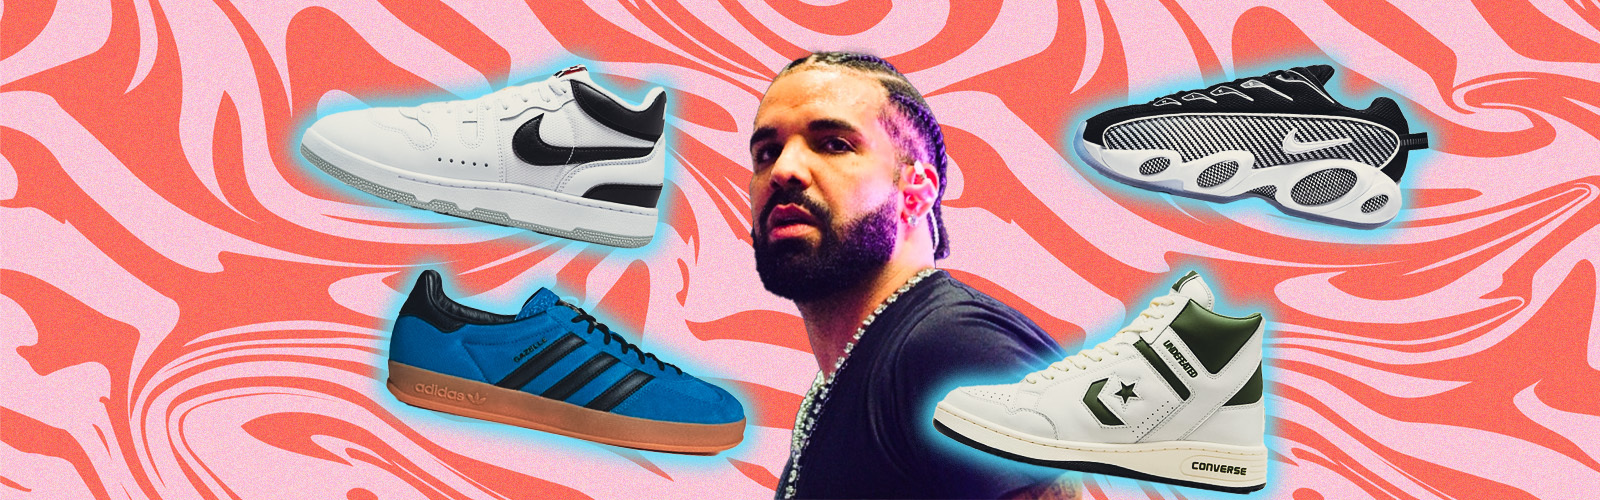 Drake's Nike Nocta Glide Gets New Colorways